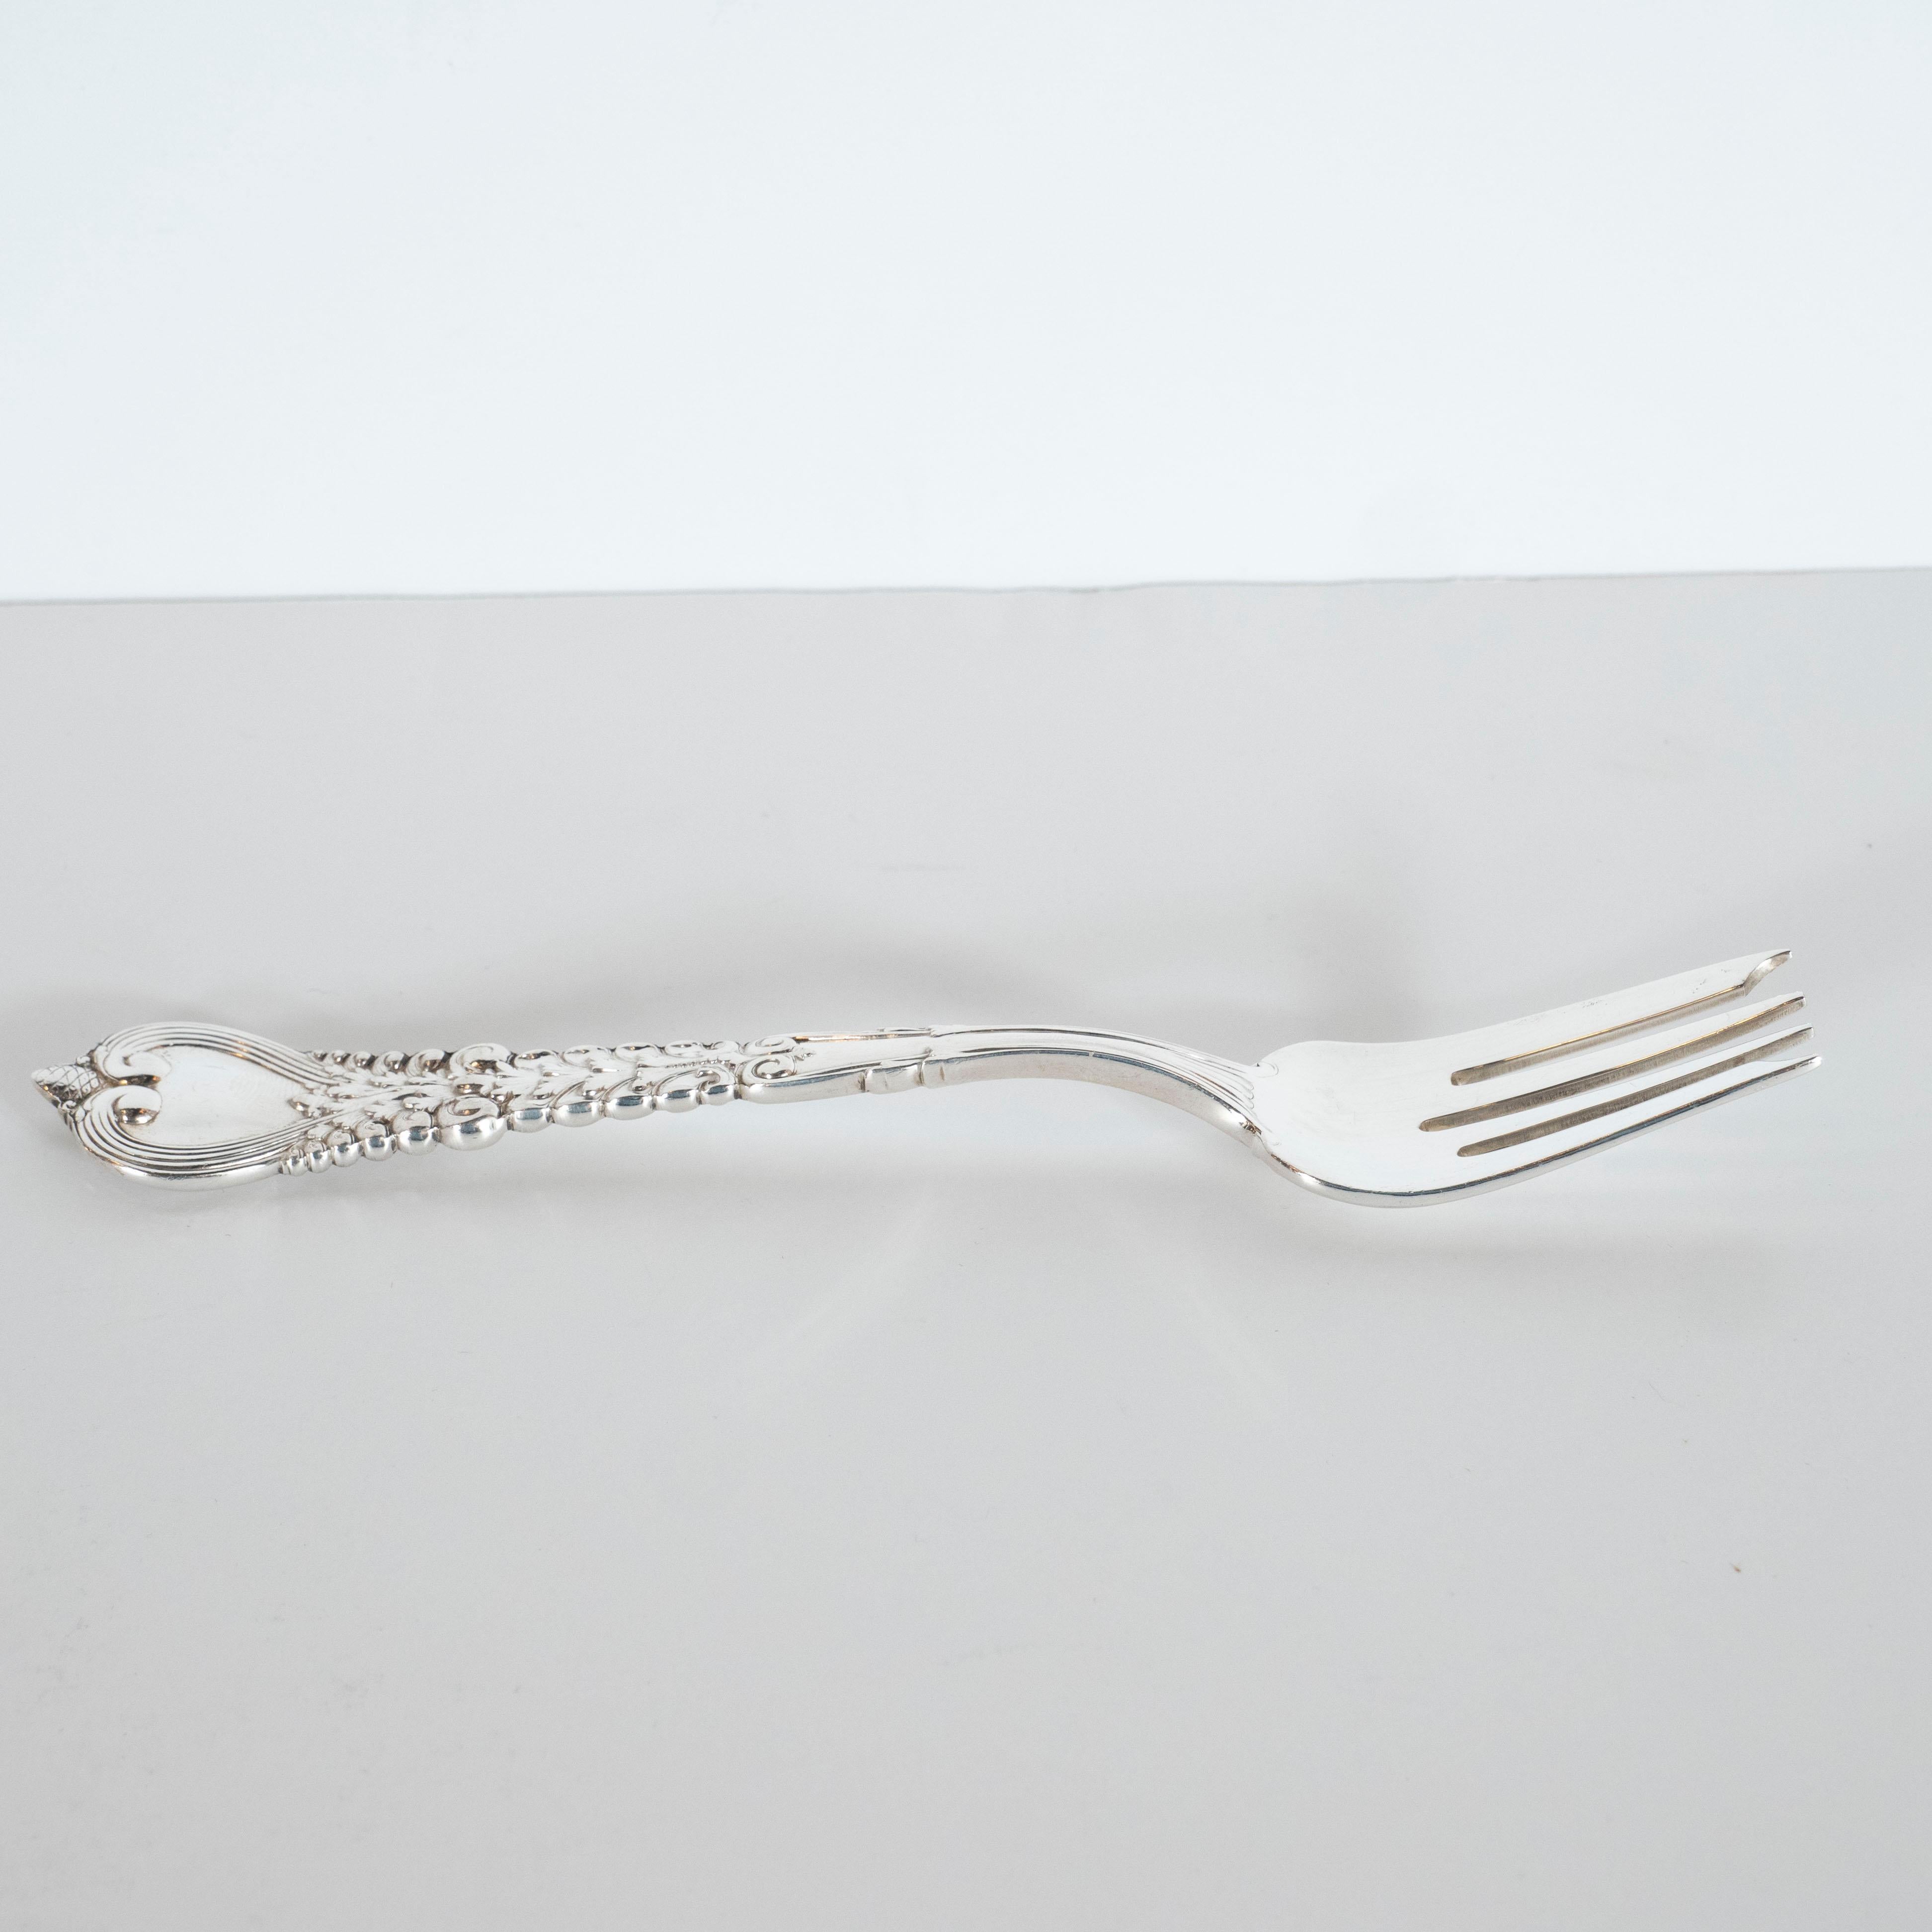 Neoclassical Set of Three Sterling Silver Small Serving Forks by Tiffany & Co.